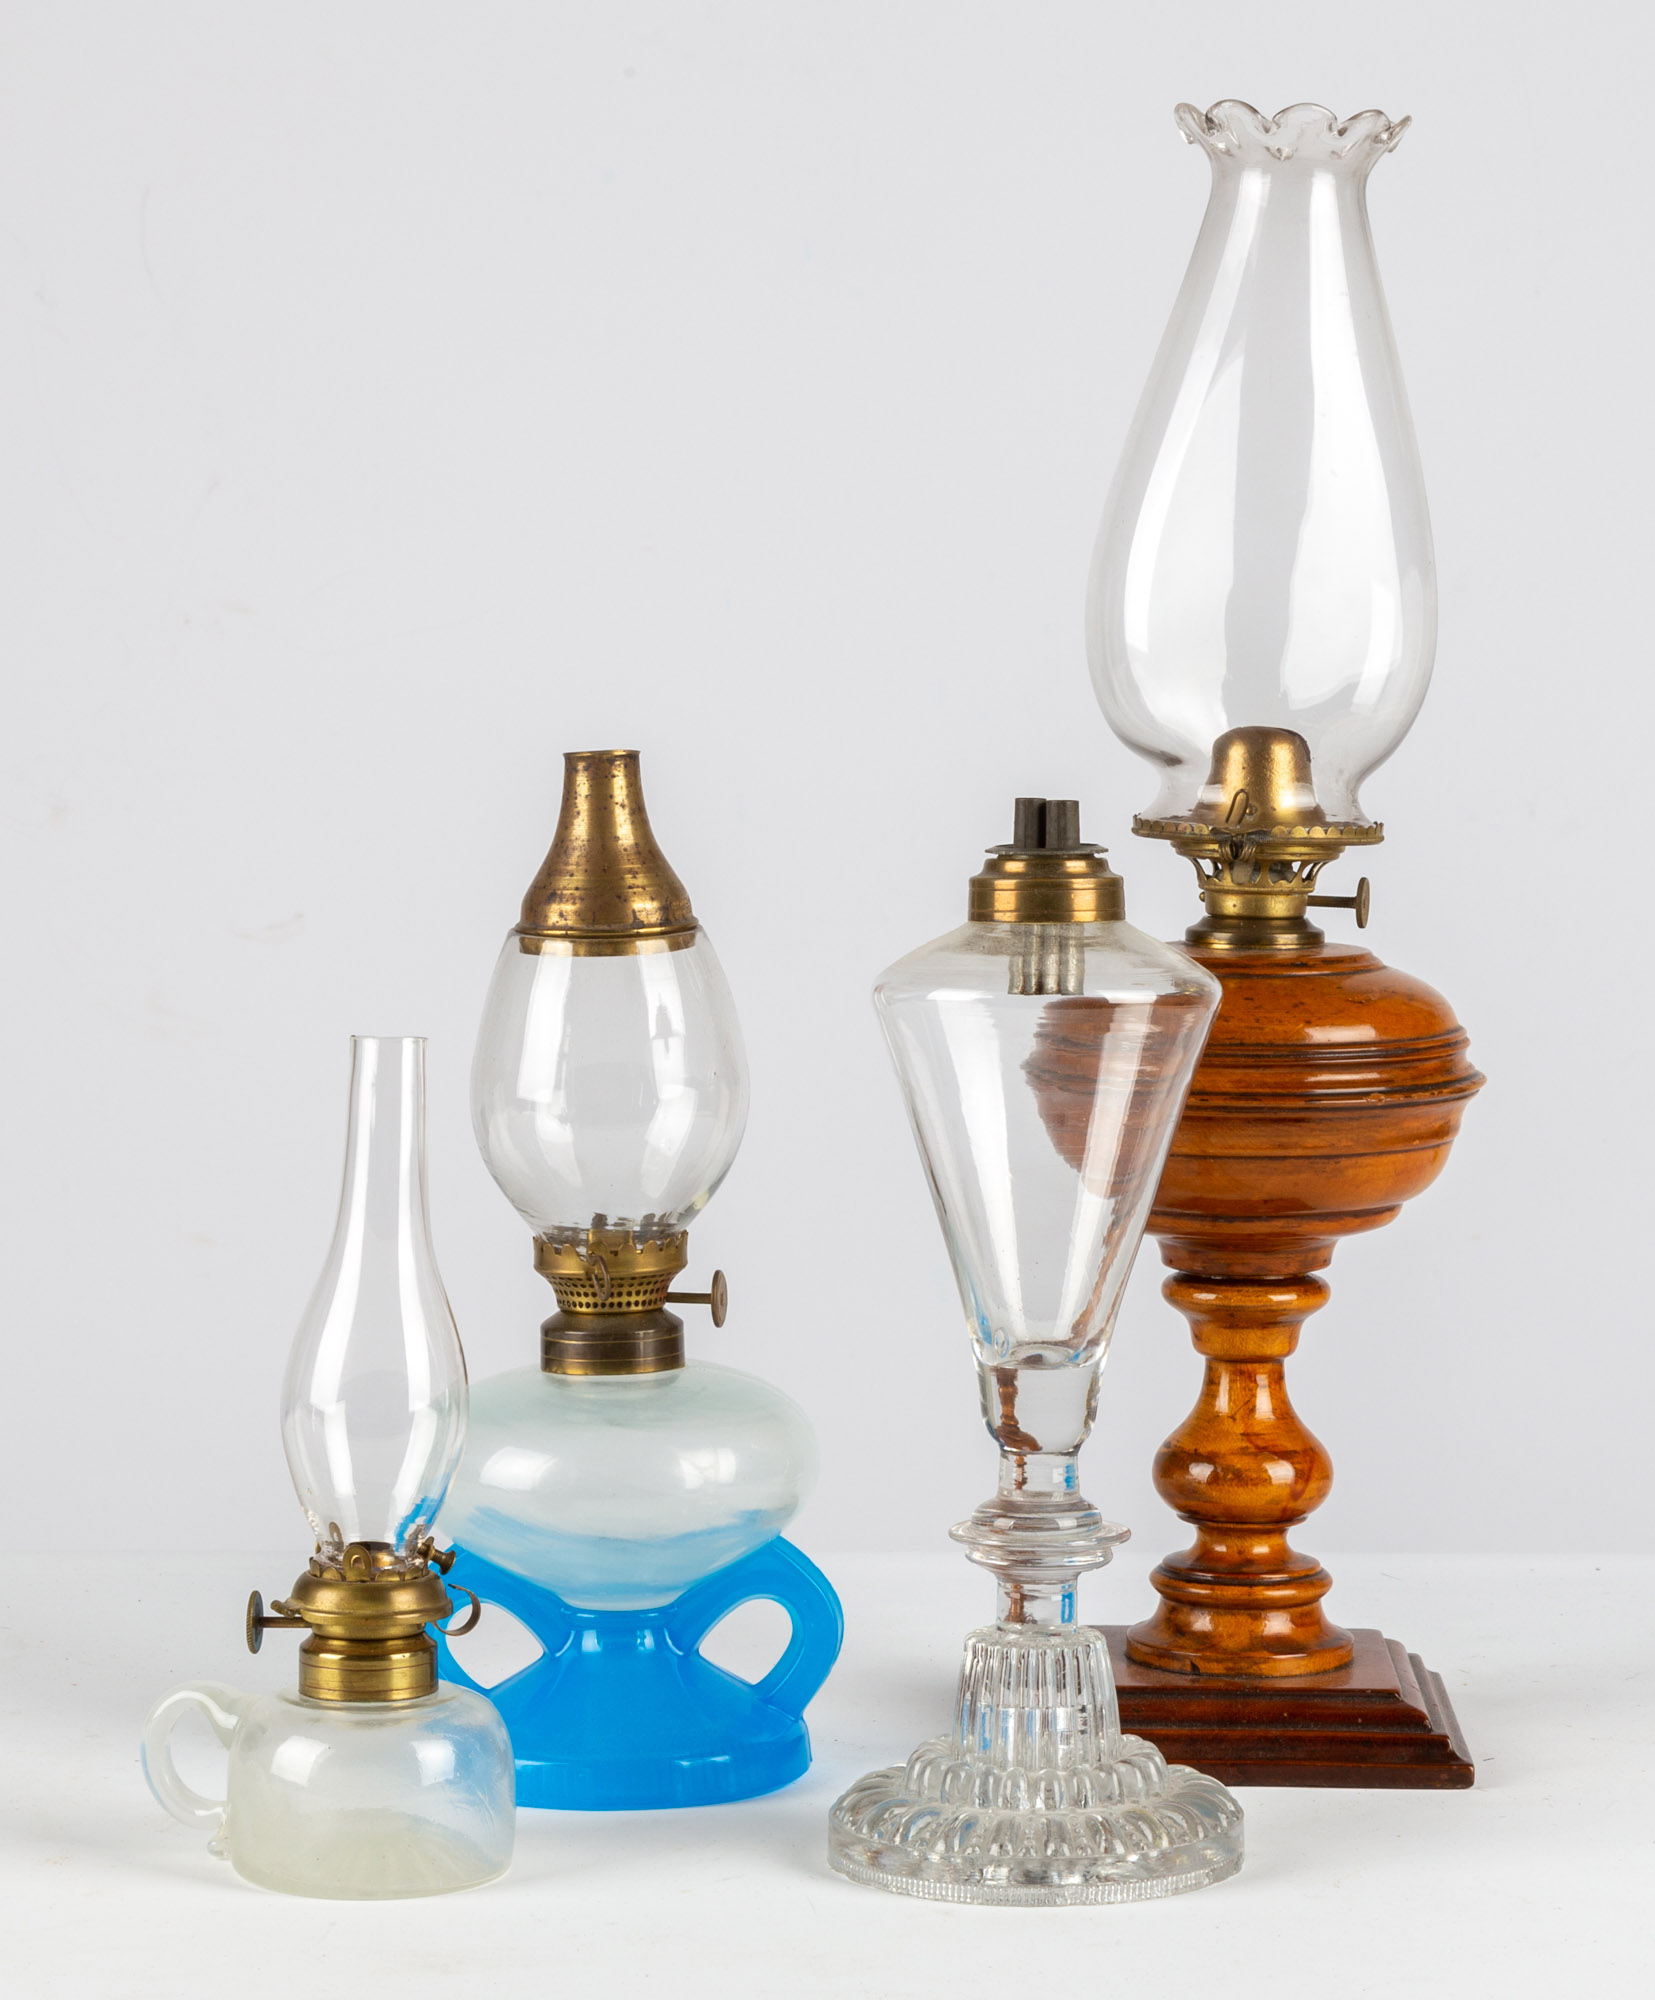 (4) OIL & WHALE OIL LAMPS 1820-1880.